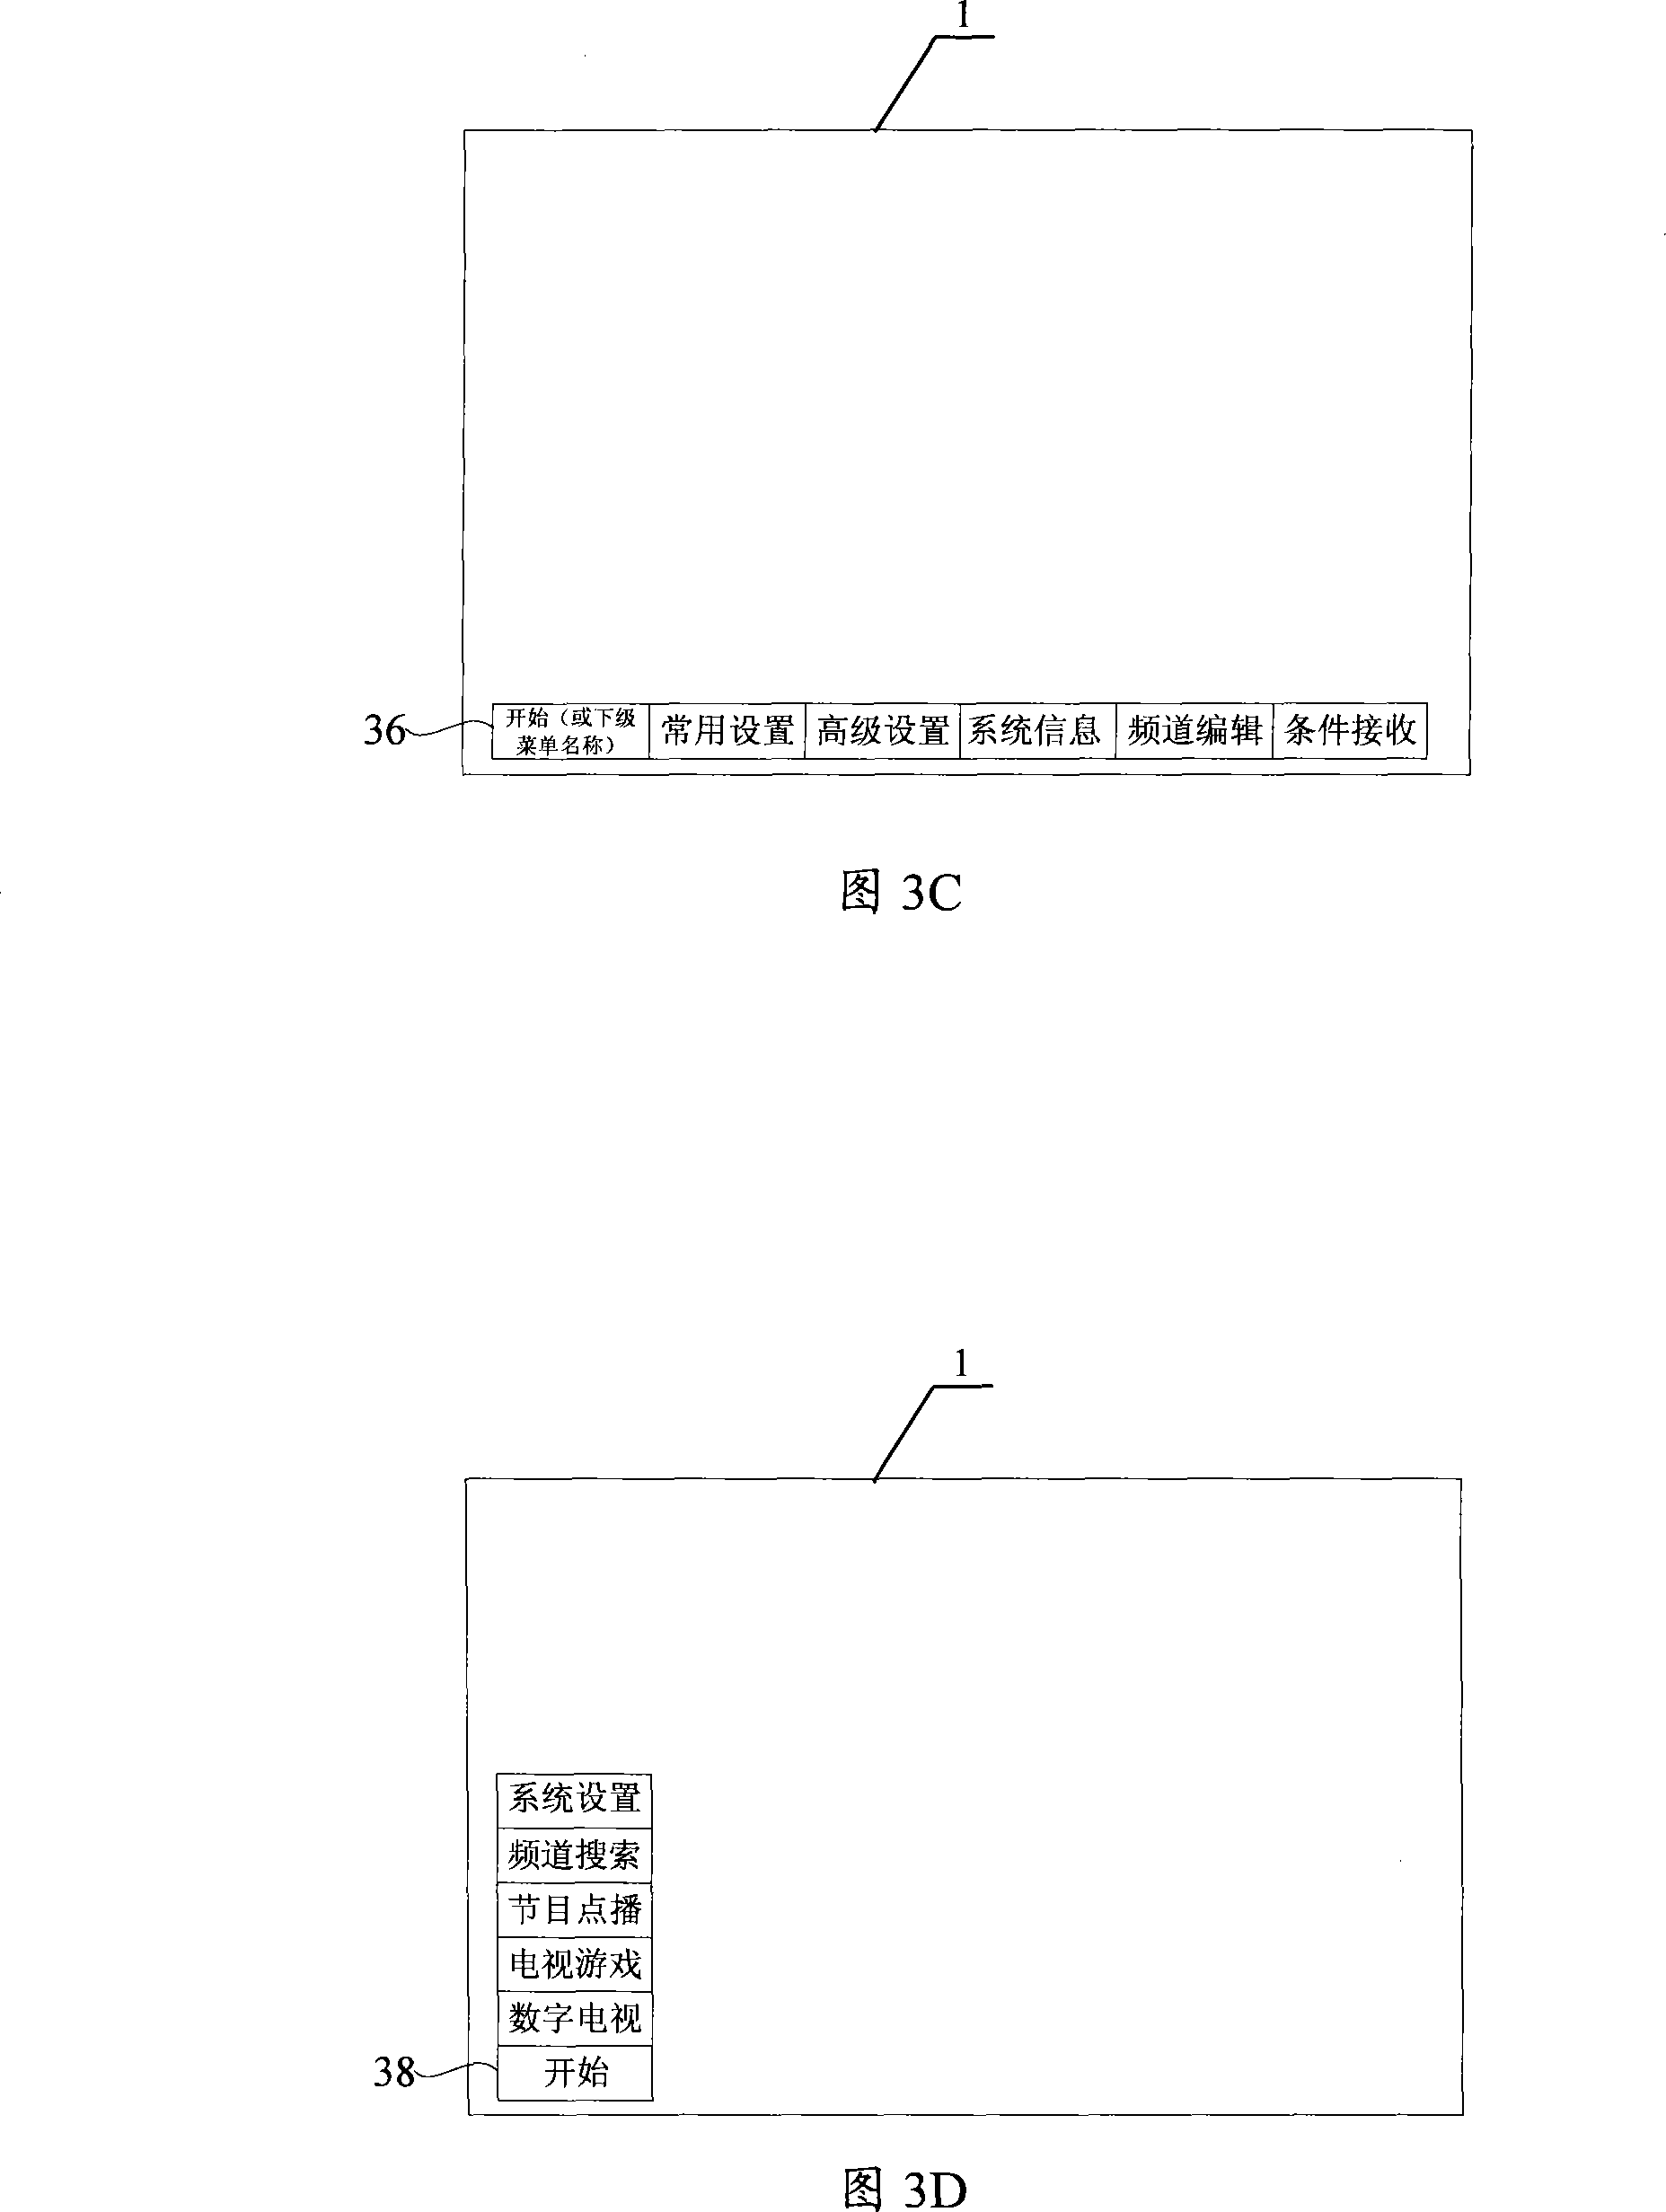 Method for displaying numeral TV set top box interactive interface